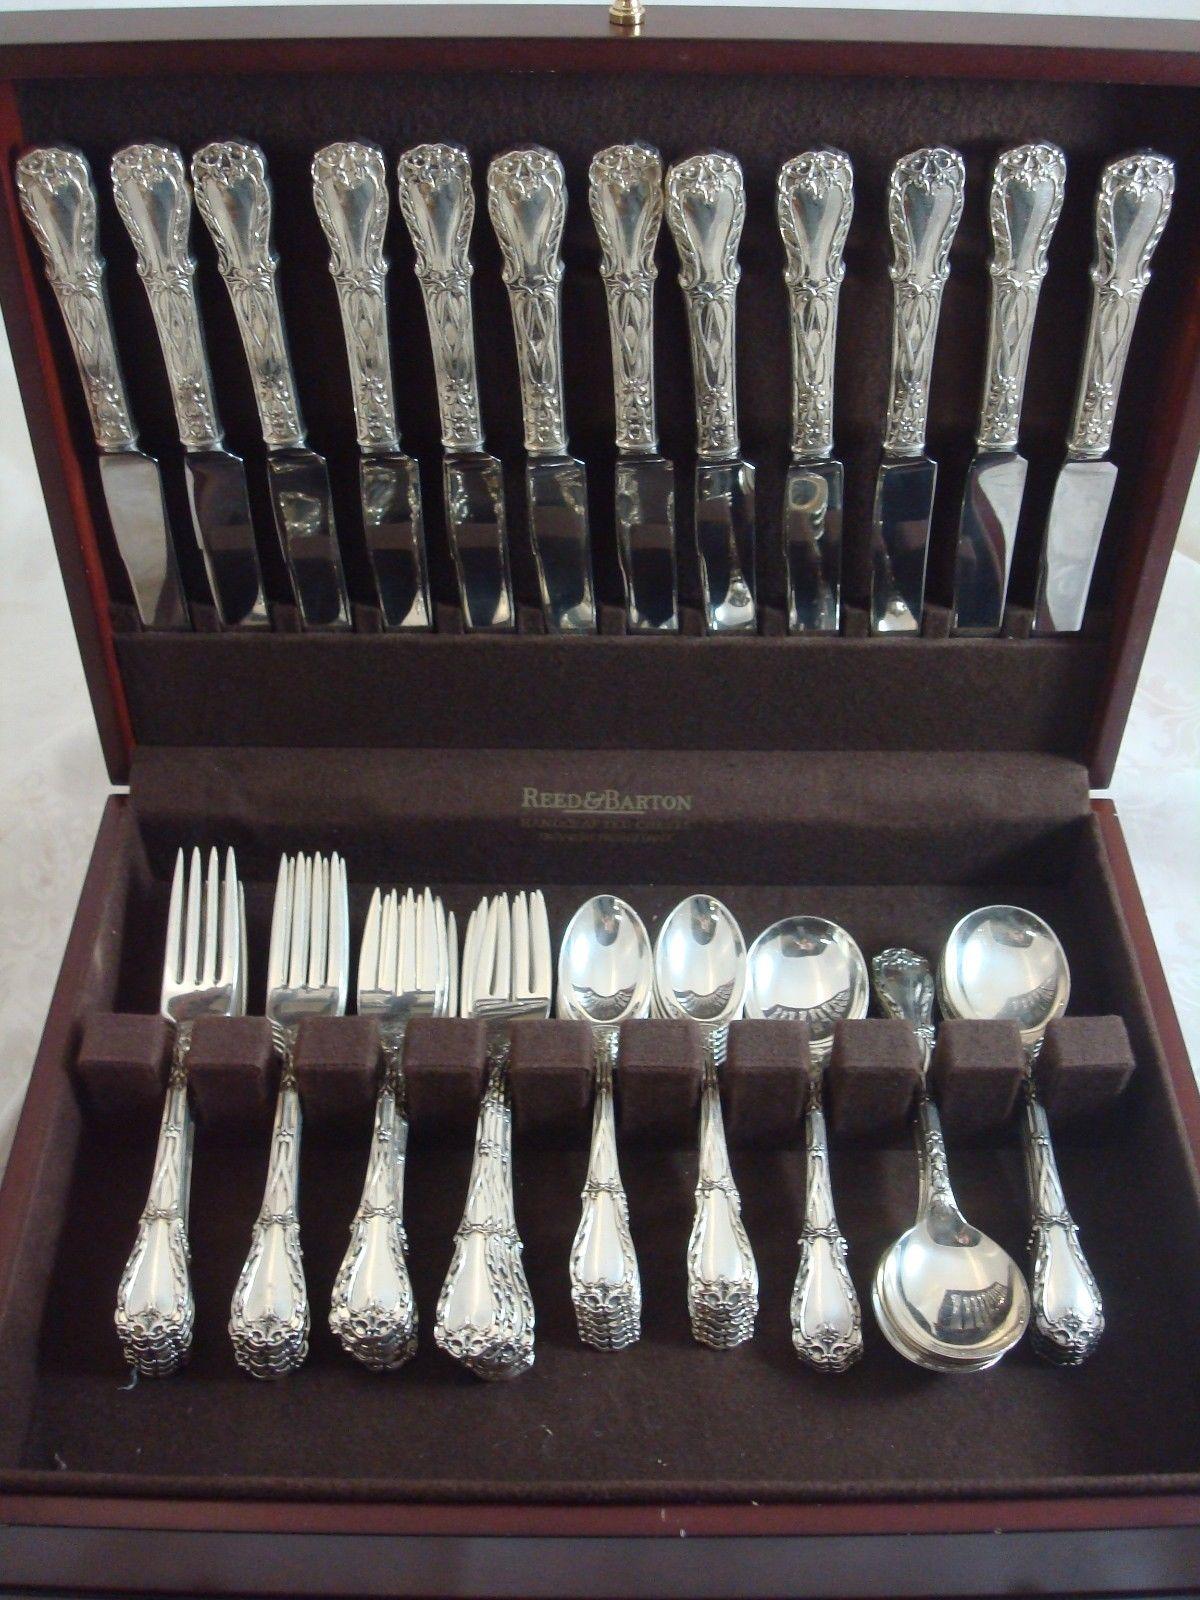 Stunning Quadrille by Kirk sterling silver flatware 60 piece set, in excellent condition. This set includes:

12 knives, 9 1/8